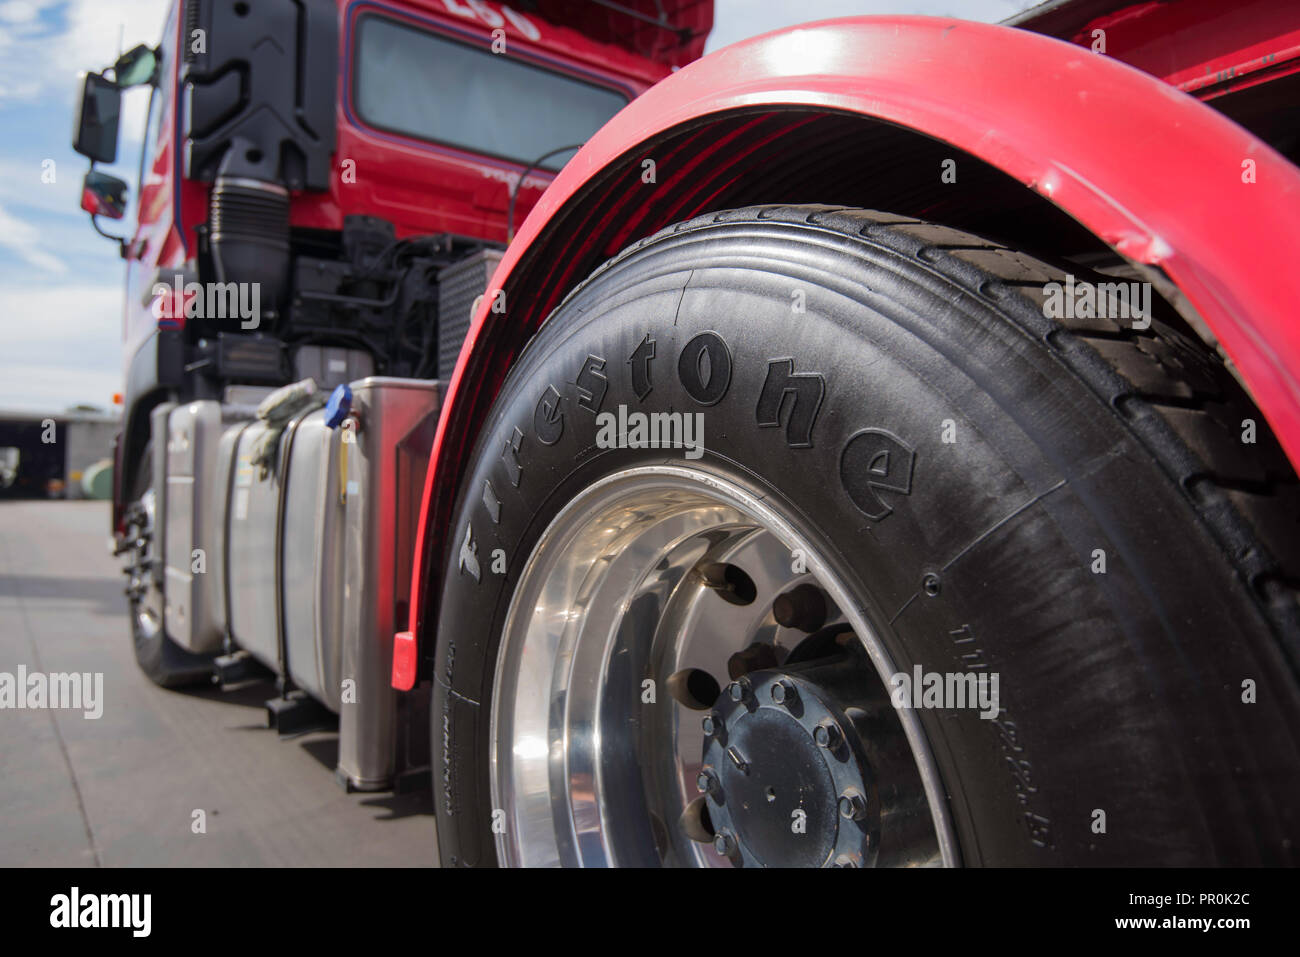 A close up image of a shiny black painted tyre, tire of a large red prime mover truck parked and stationary Stock Photo